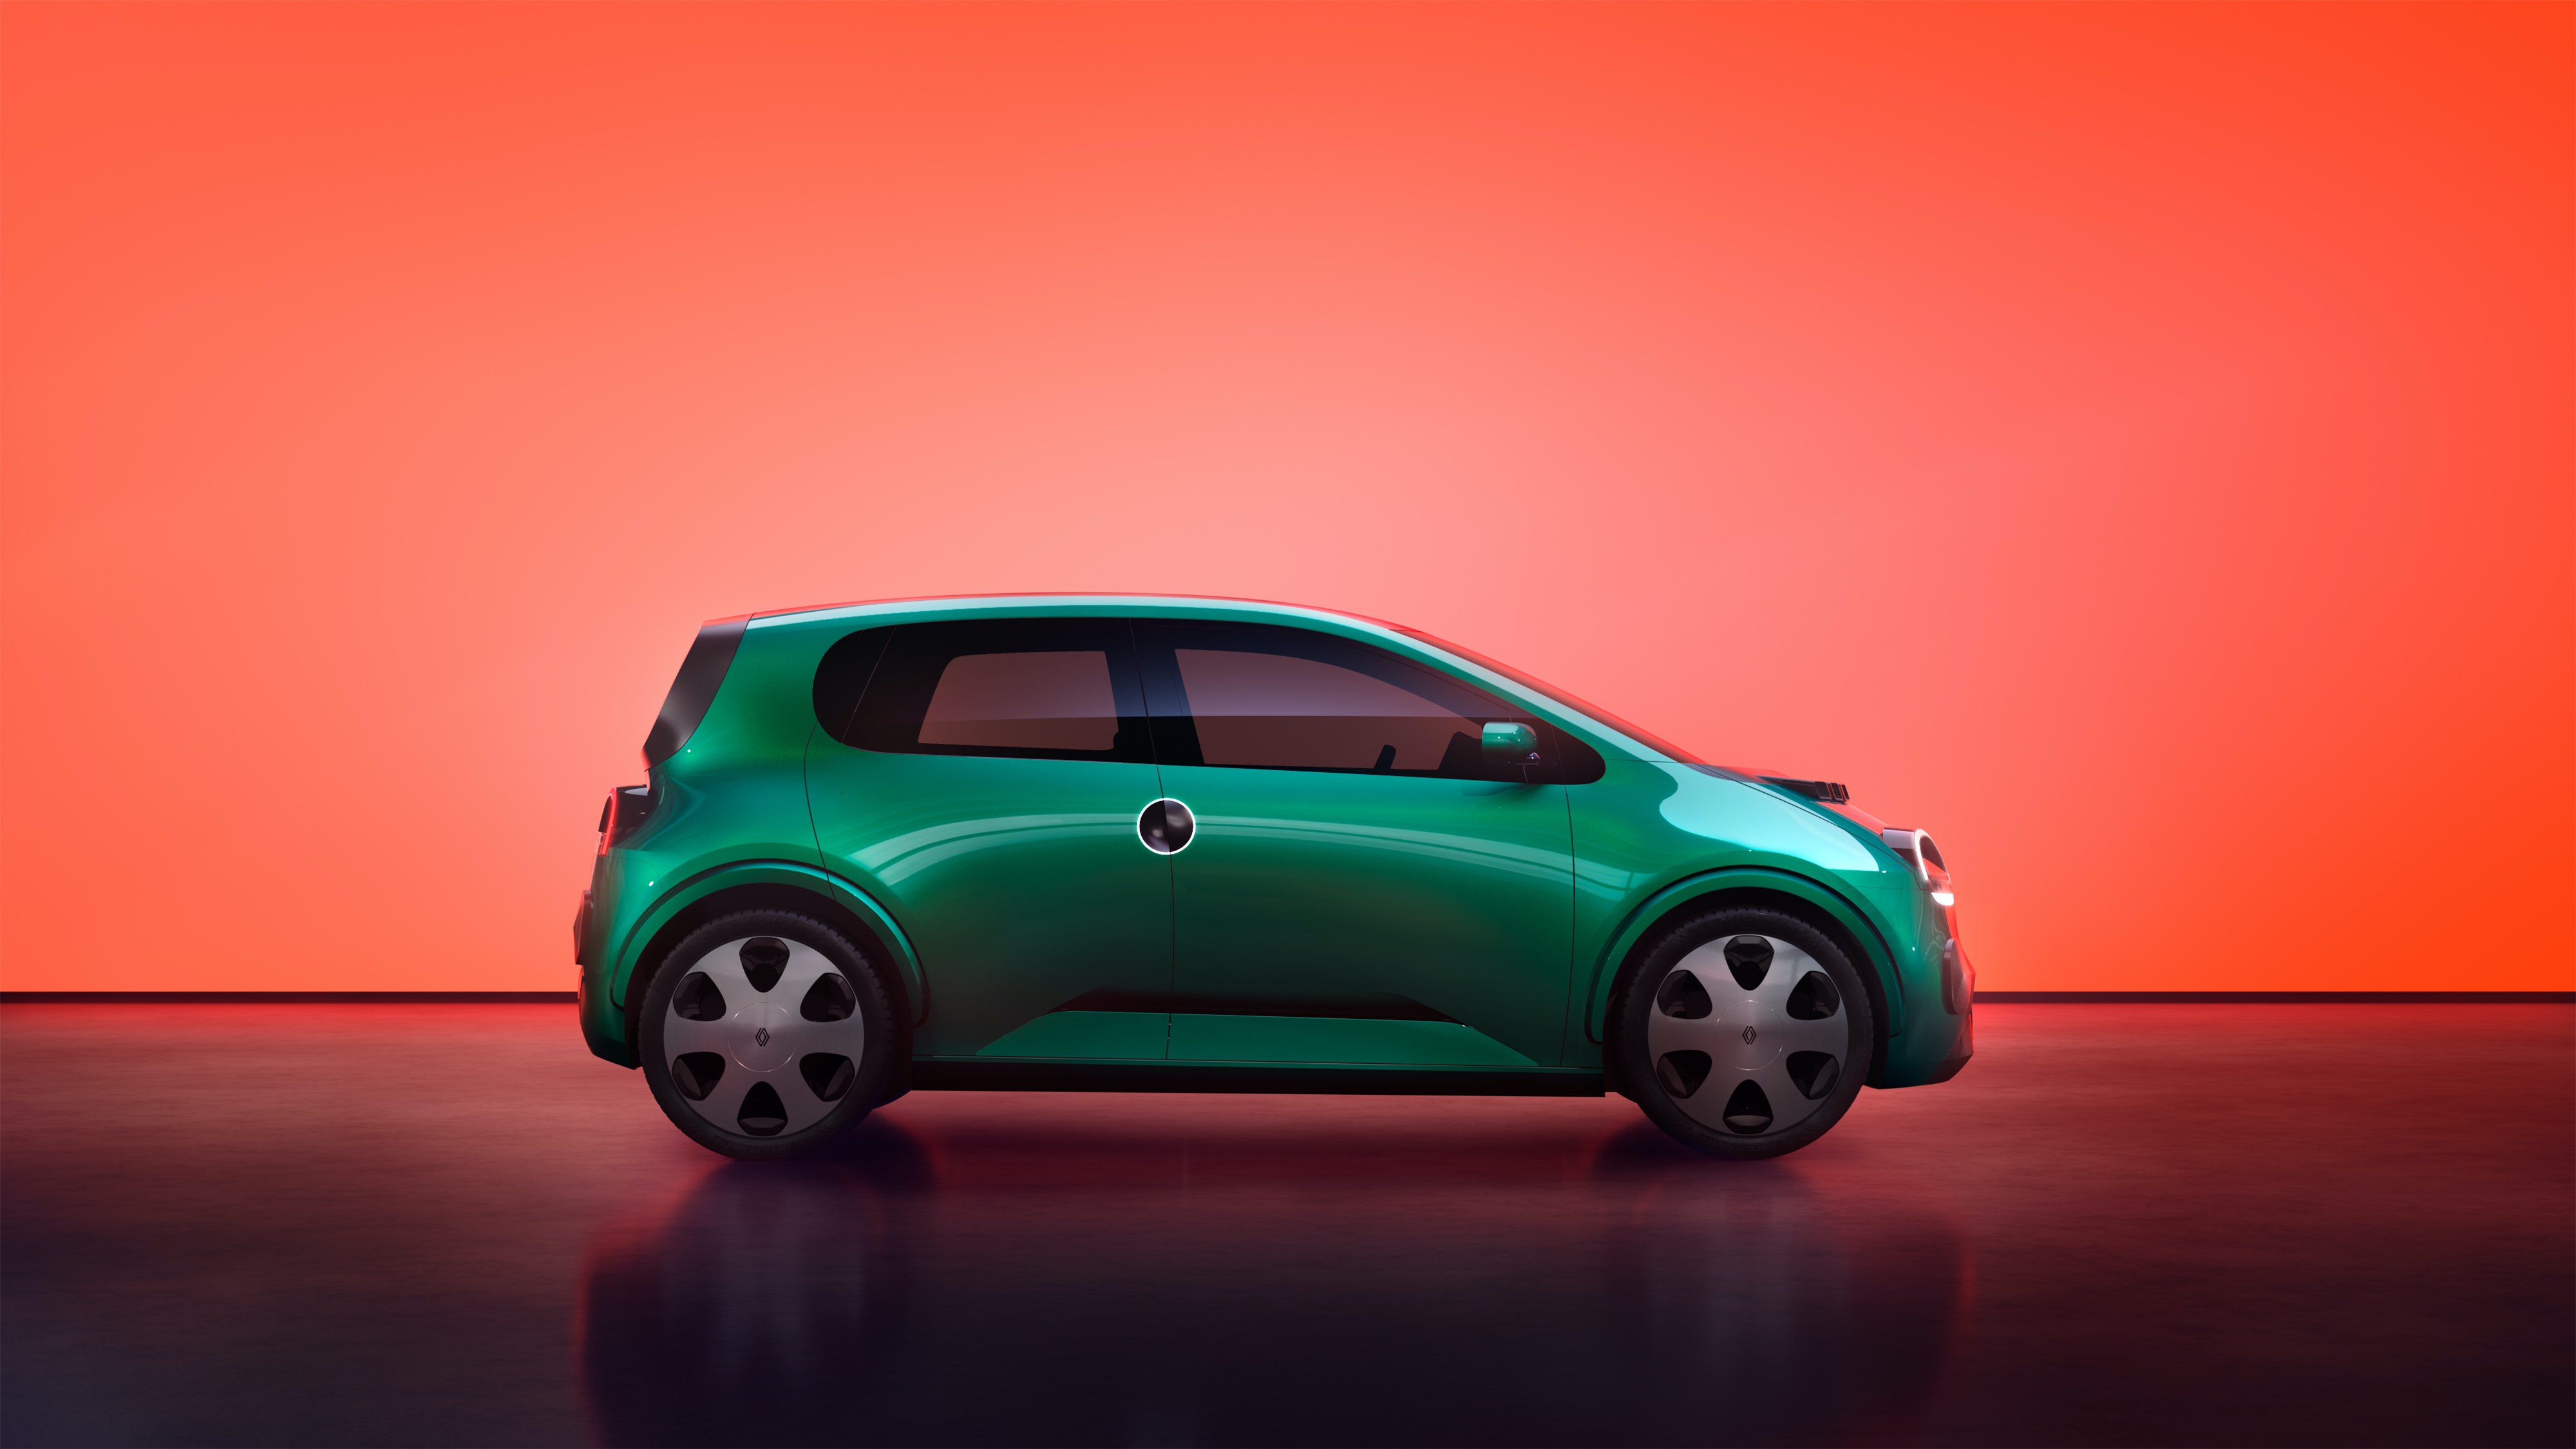 The perfect European runabout: This new Twingo is so '90s and all electric